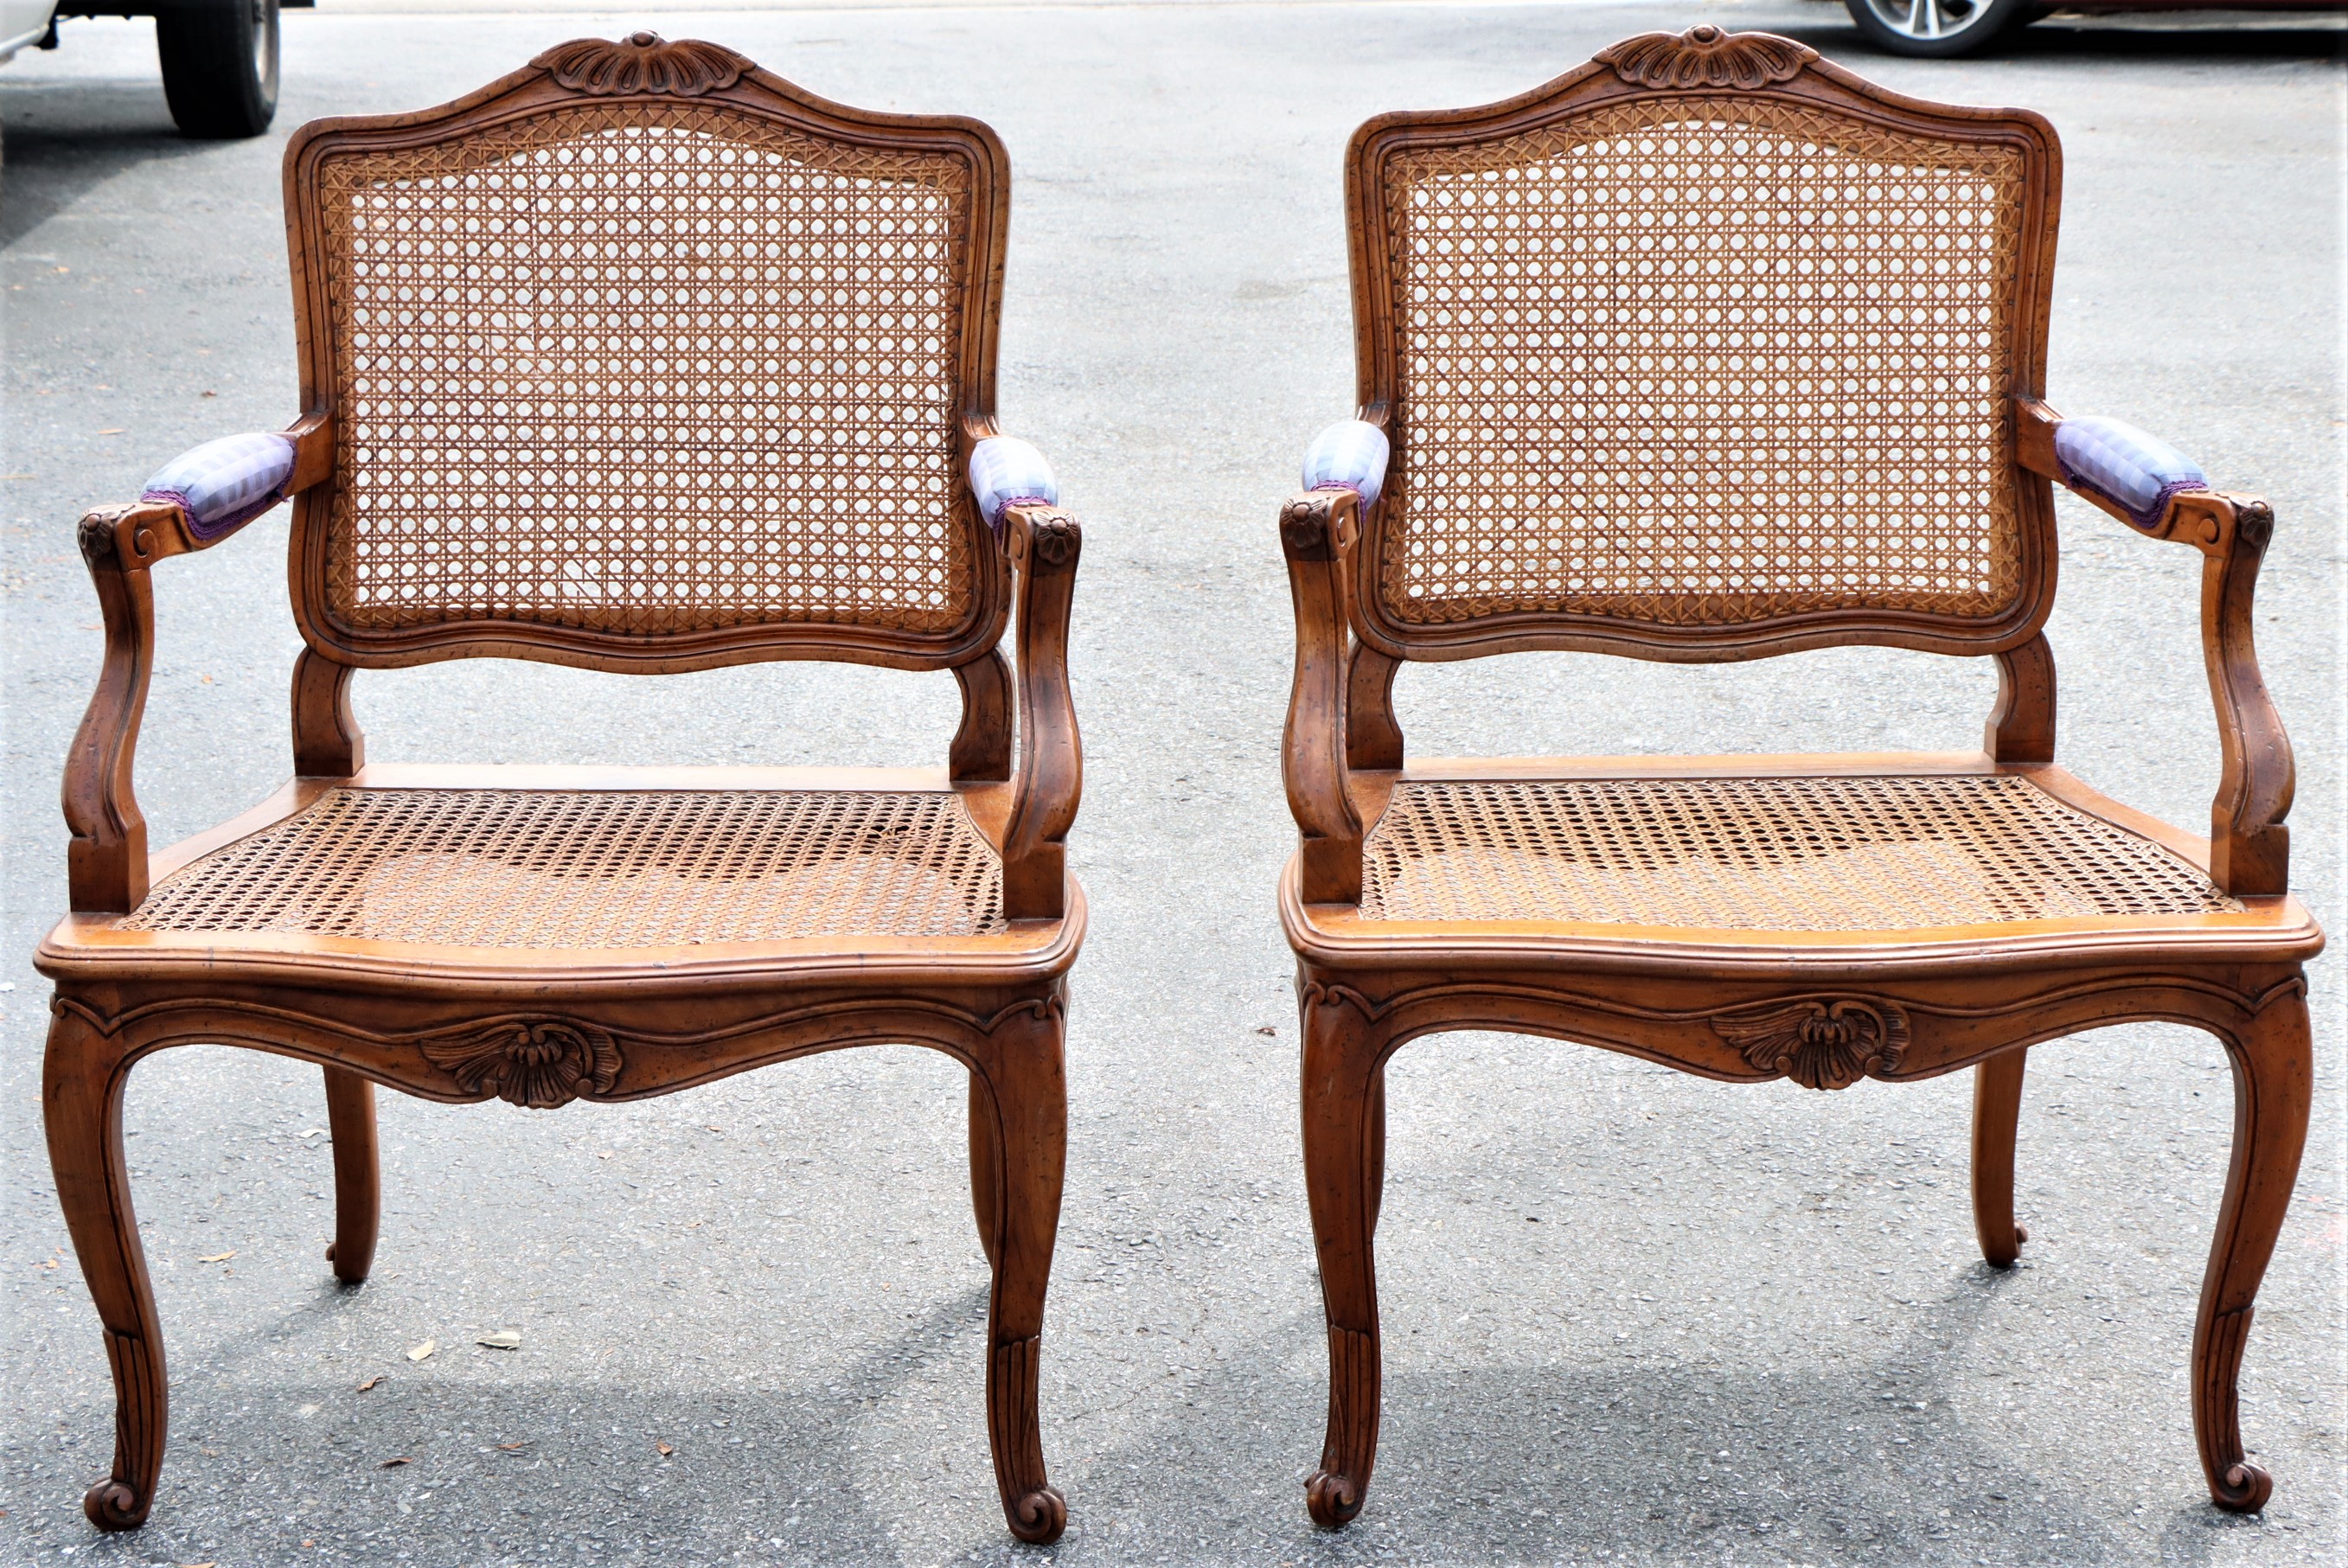 Pair of French Wood & Cane Chairs - Image 8 of 8